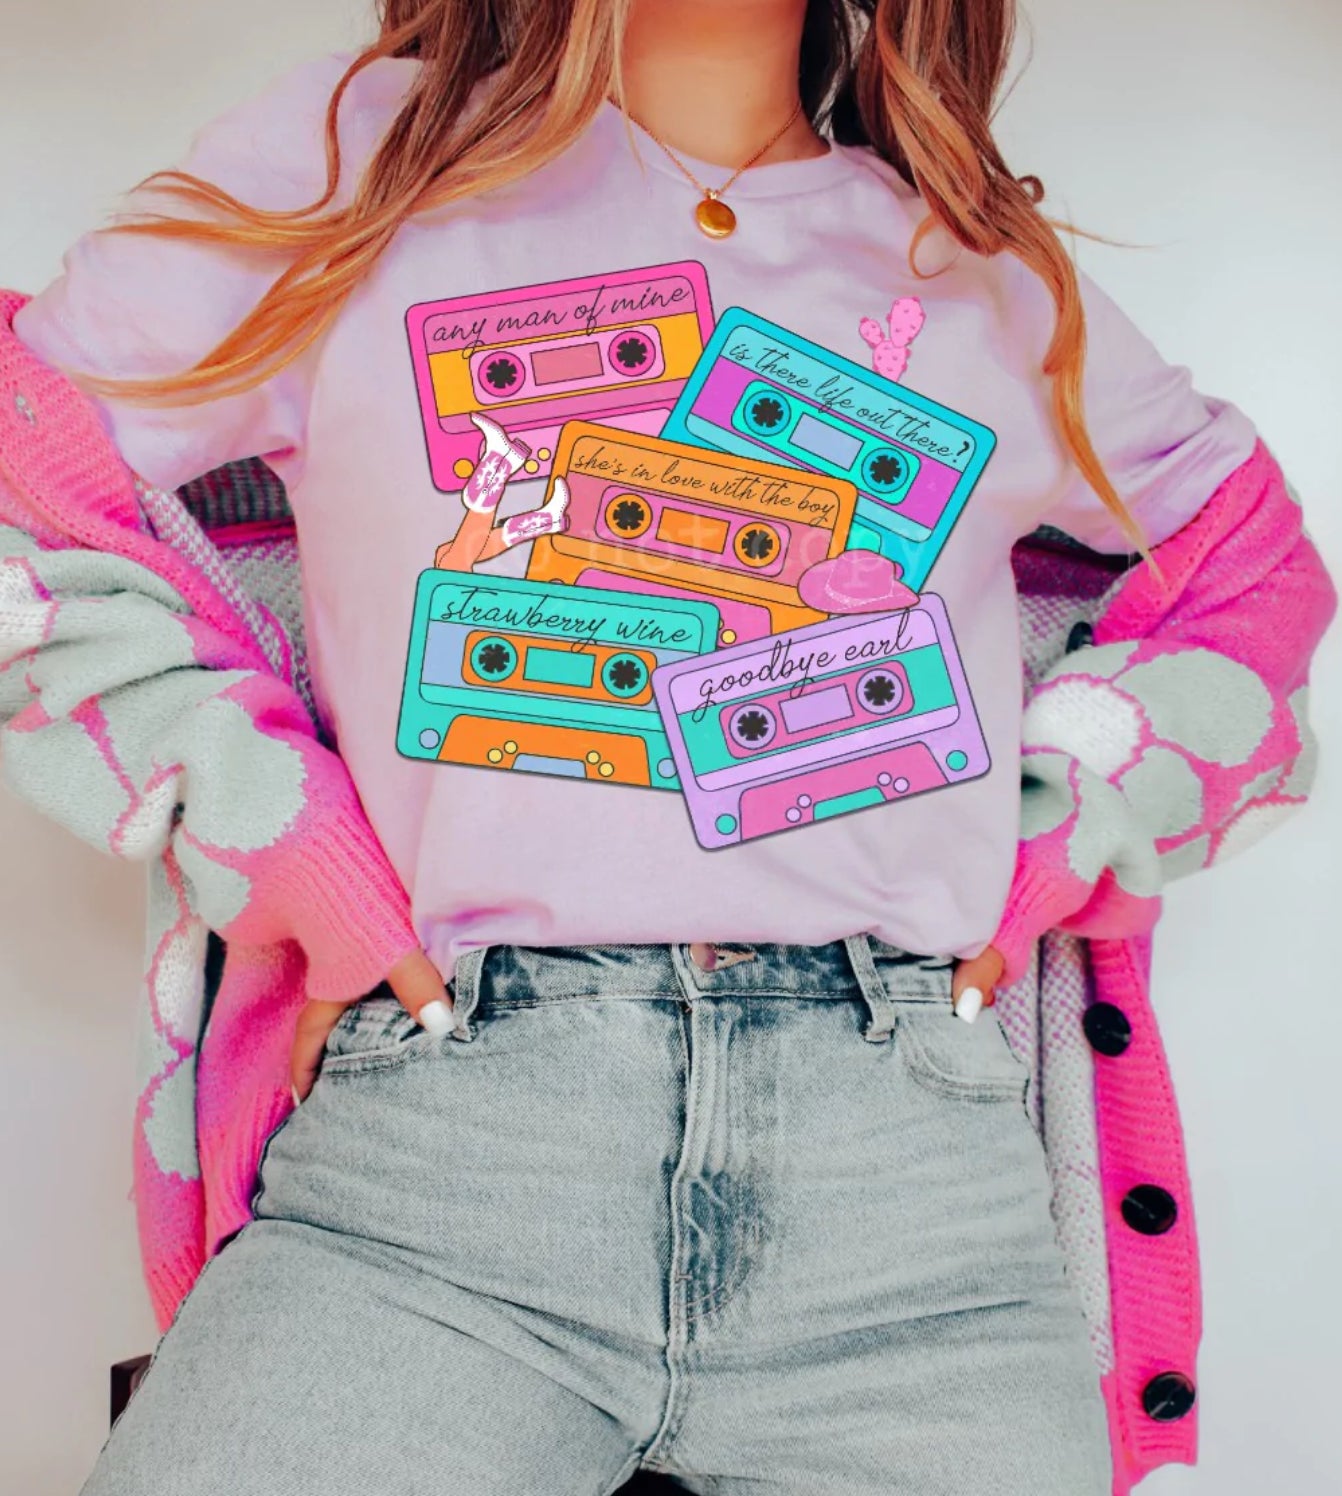 “90’s Cassettes” graphic tee